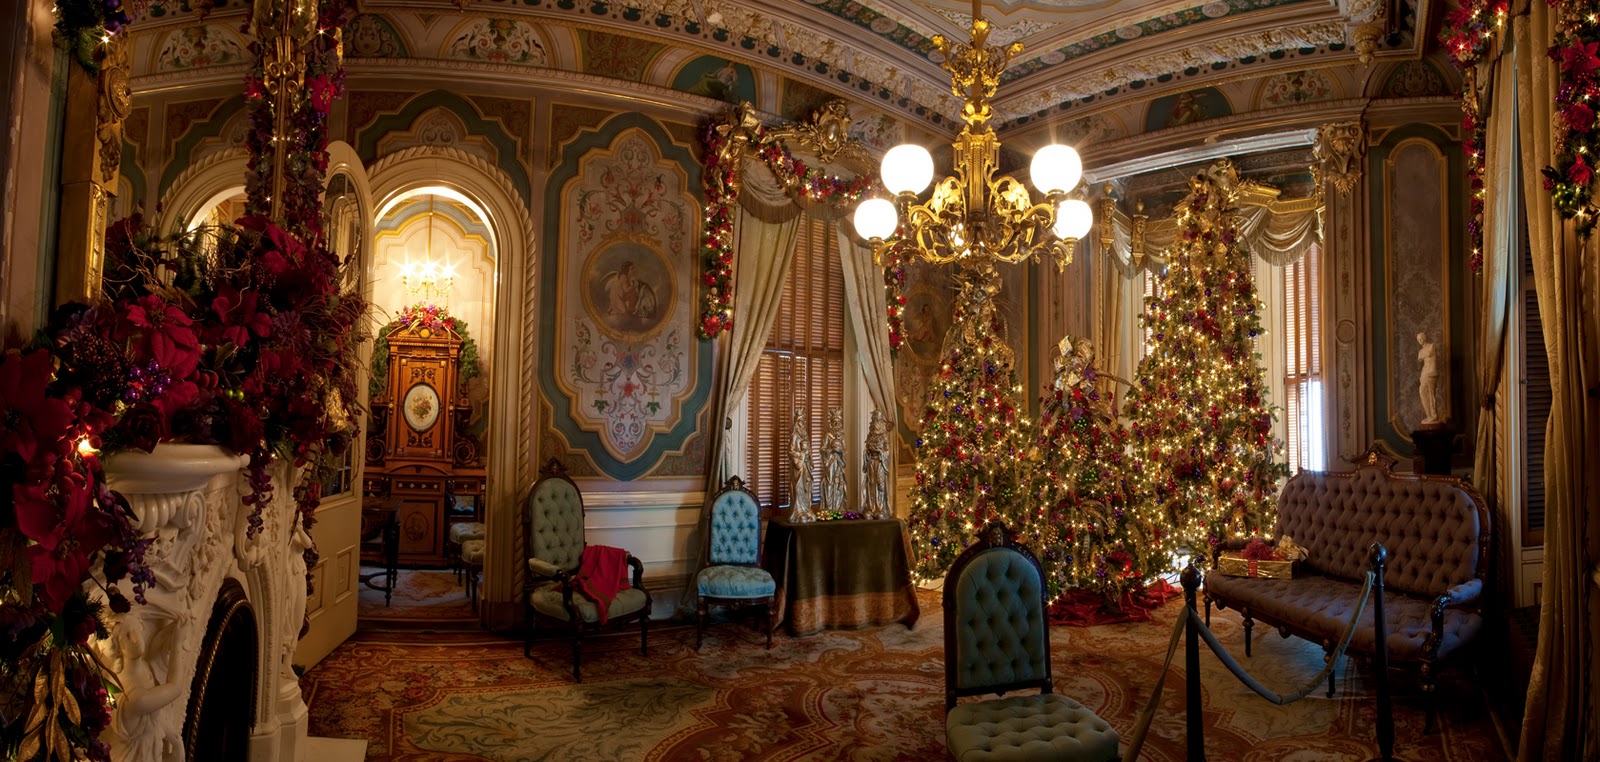 Another Lovely Parlor Decorated For Christmas Including The Ornately